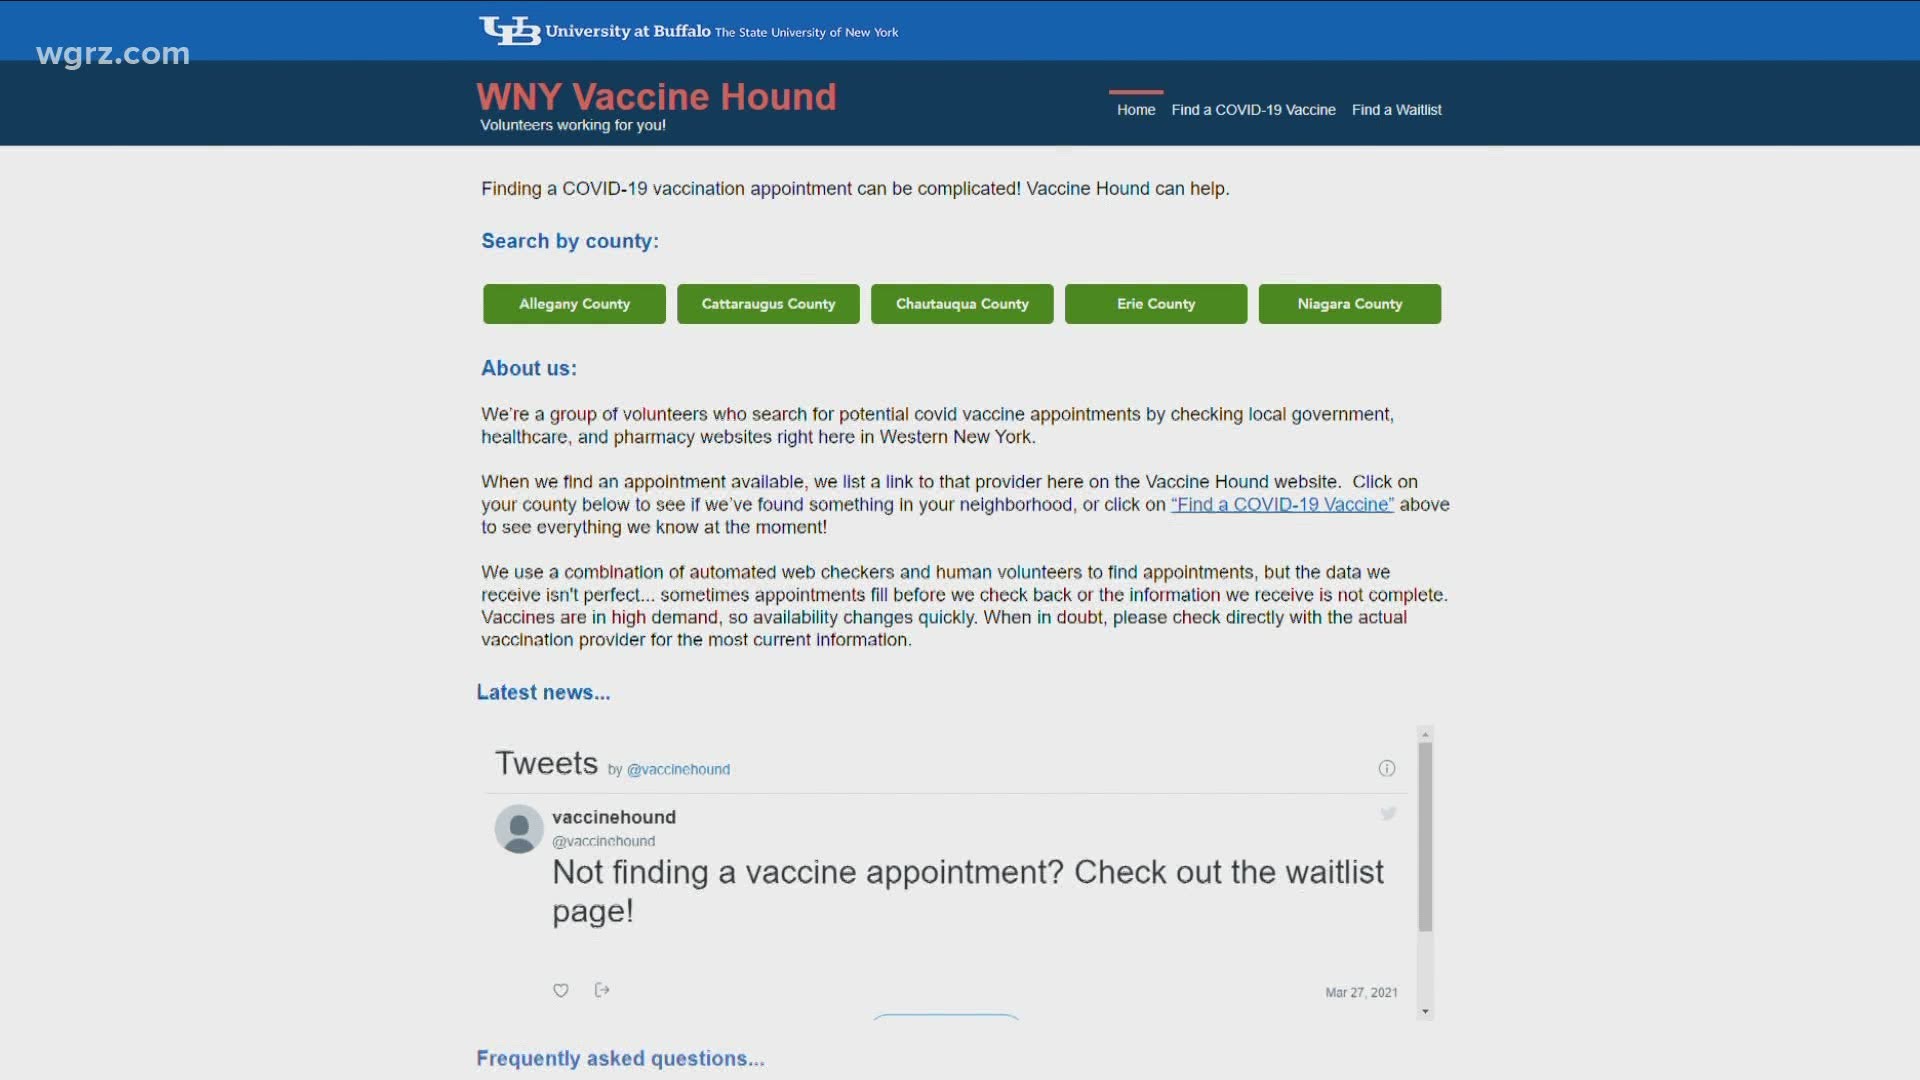 University at Buffalo has launched a website to help you find a vaccine appointment.
It's called "Western New York Vaccine Hound."